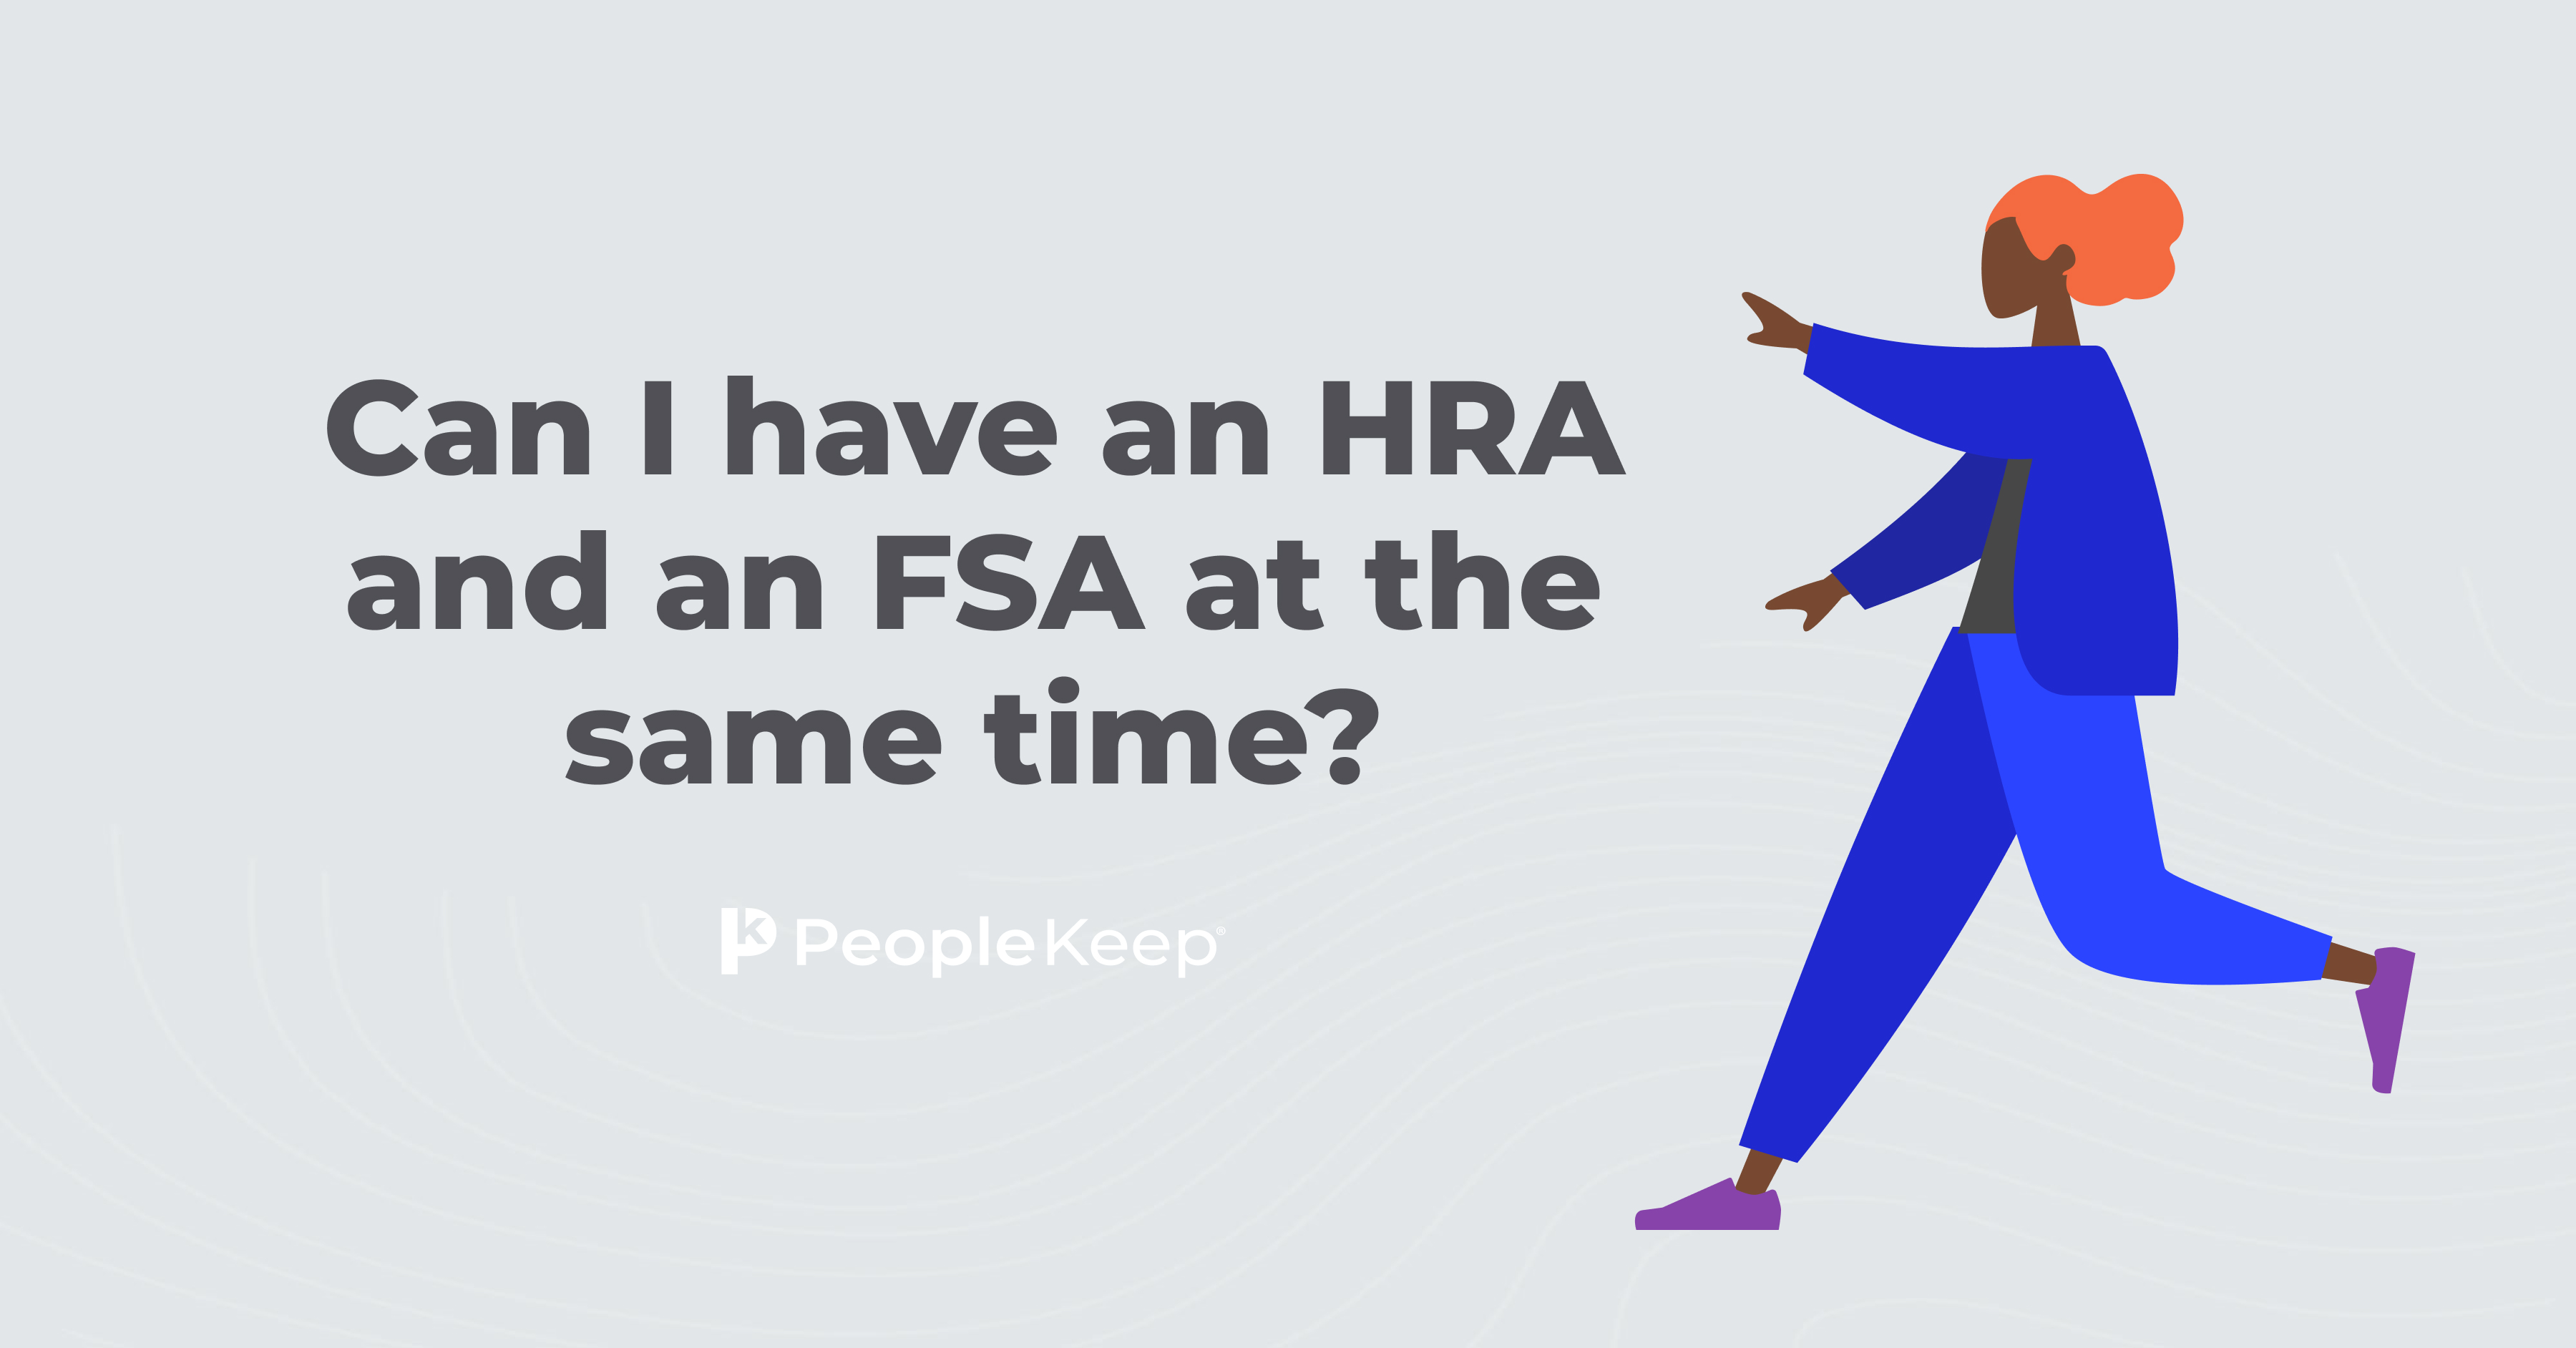 Can I have an HRA and an FSA at the same time?